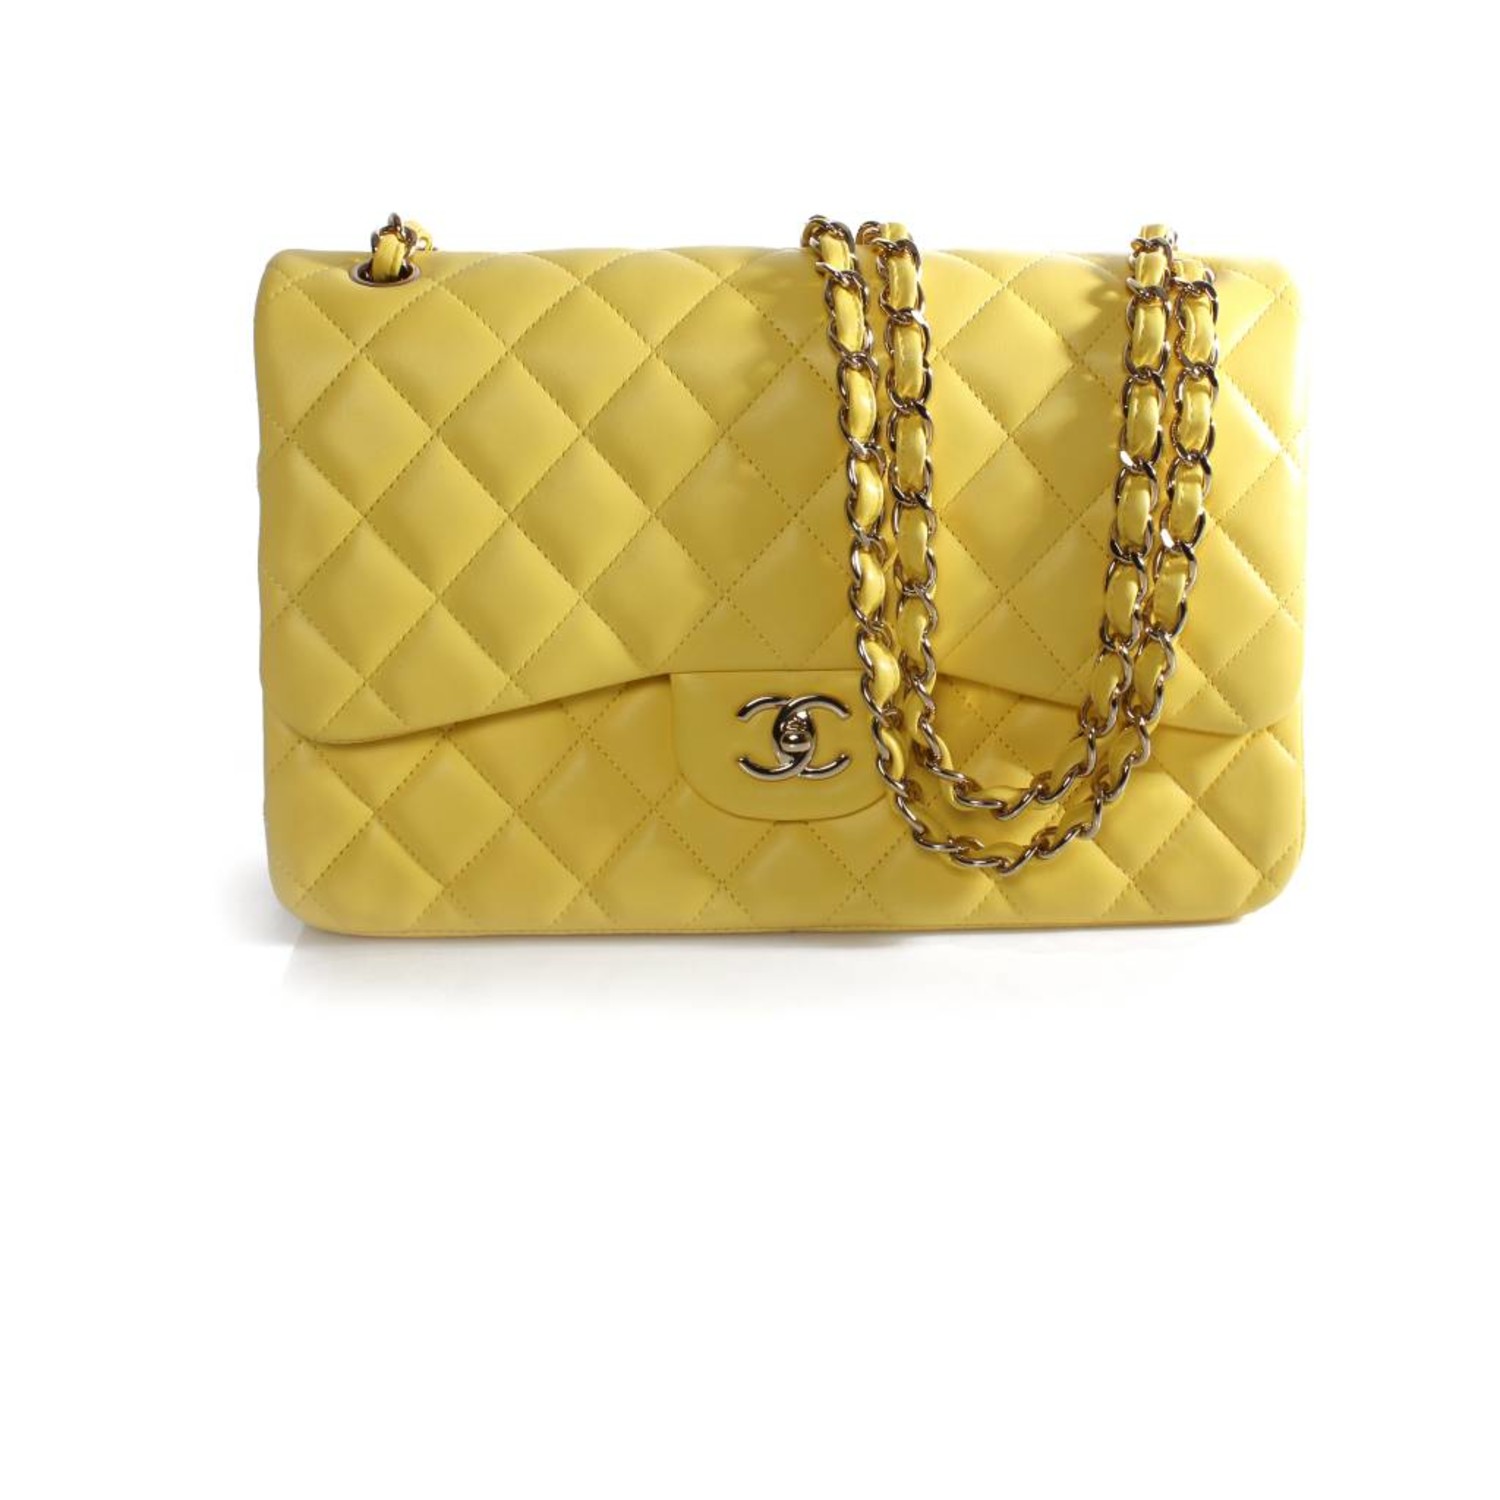 Chanel, Jumbo Classic 2.55 double flap bag in bright yellow